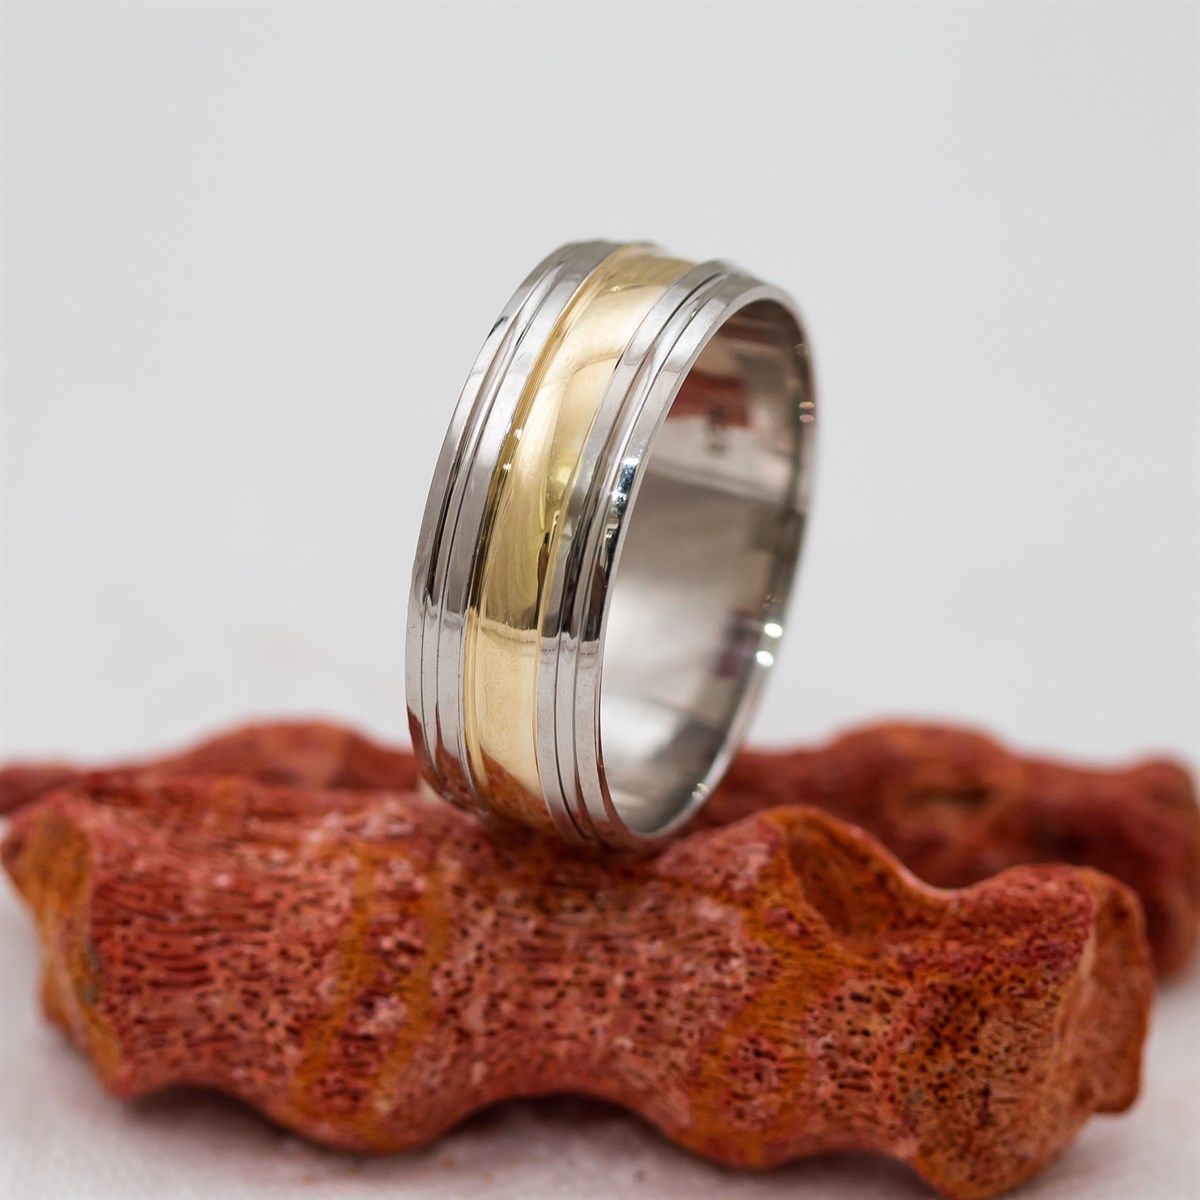 Rhodiumed Gold Colored Unisex Sterling Silver Wedding Ring